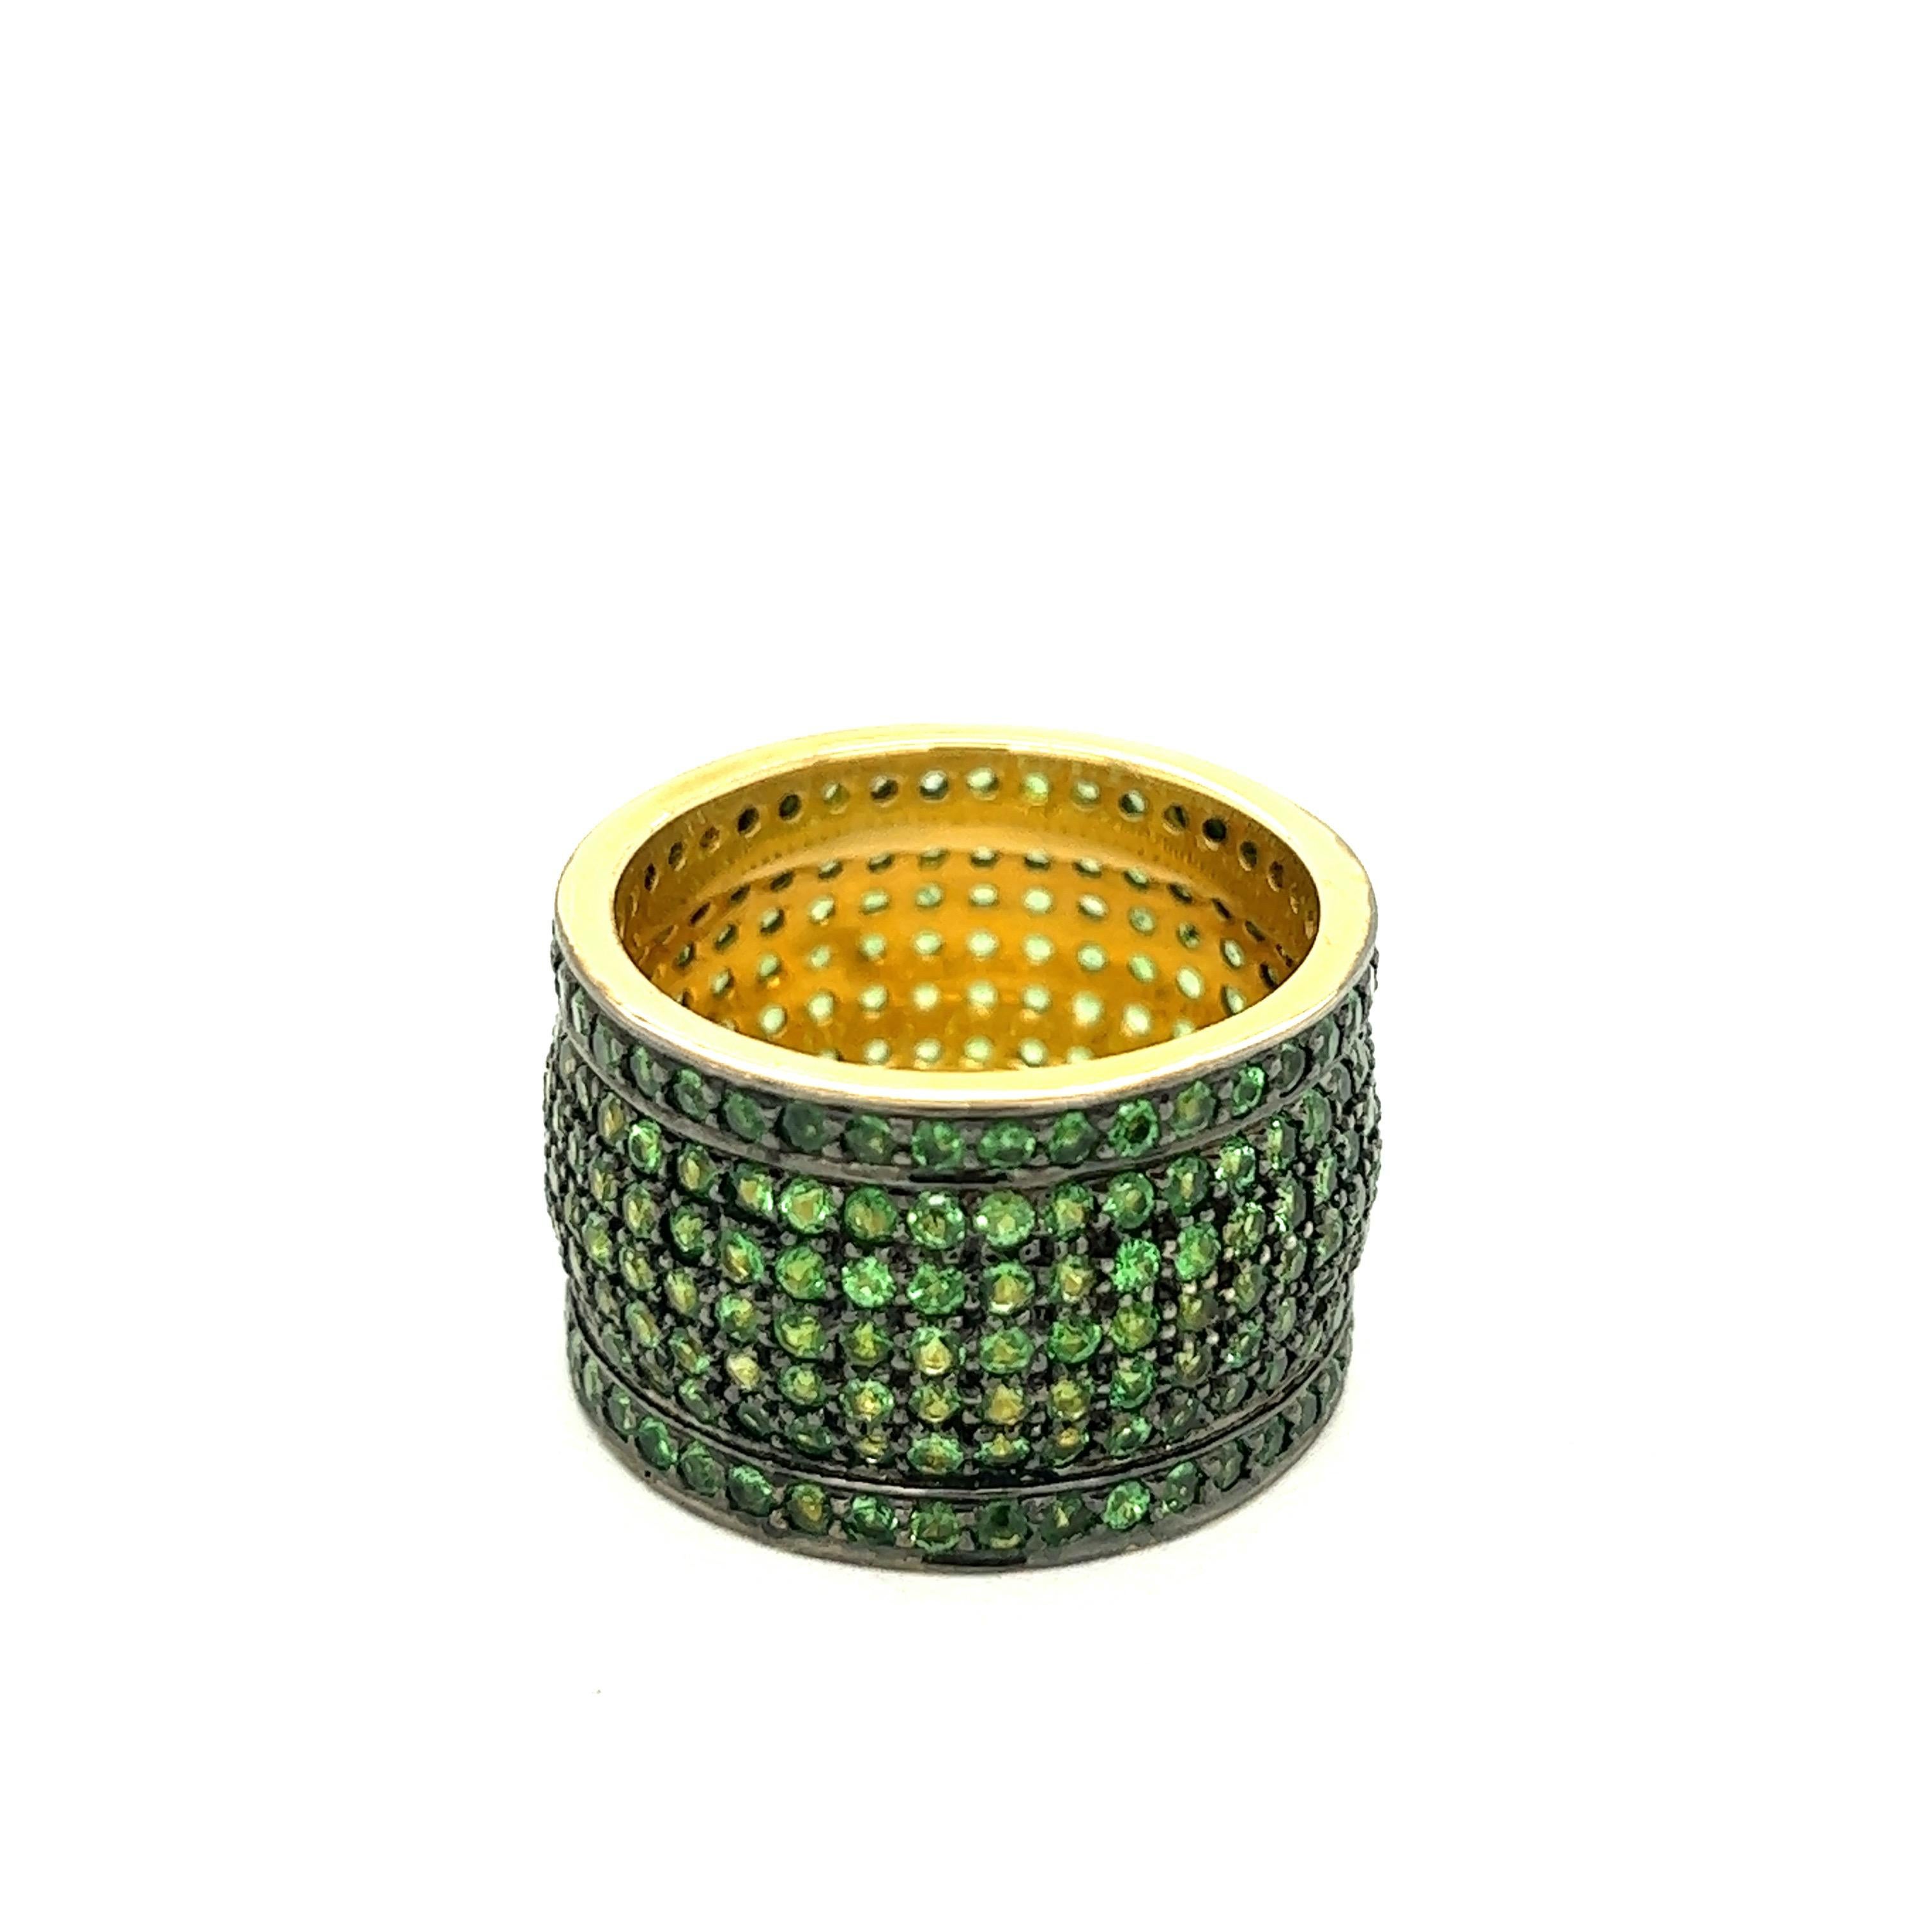 Green Garnet 14k Yellow Gold Band Ring

Round-cut green garnets set all over a 14 karat yellow gold band ring; band width 1.4 cm

Size: 8.5 US
Total weight: 10.3 grams